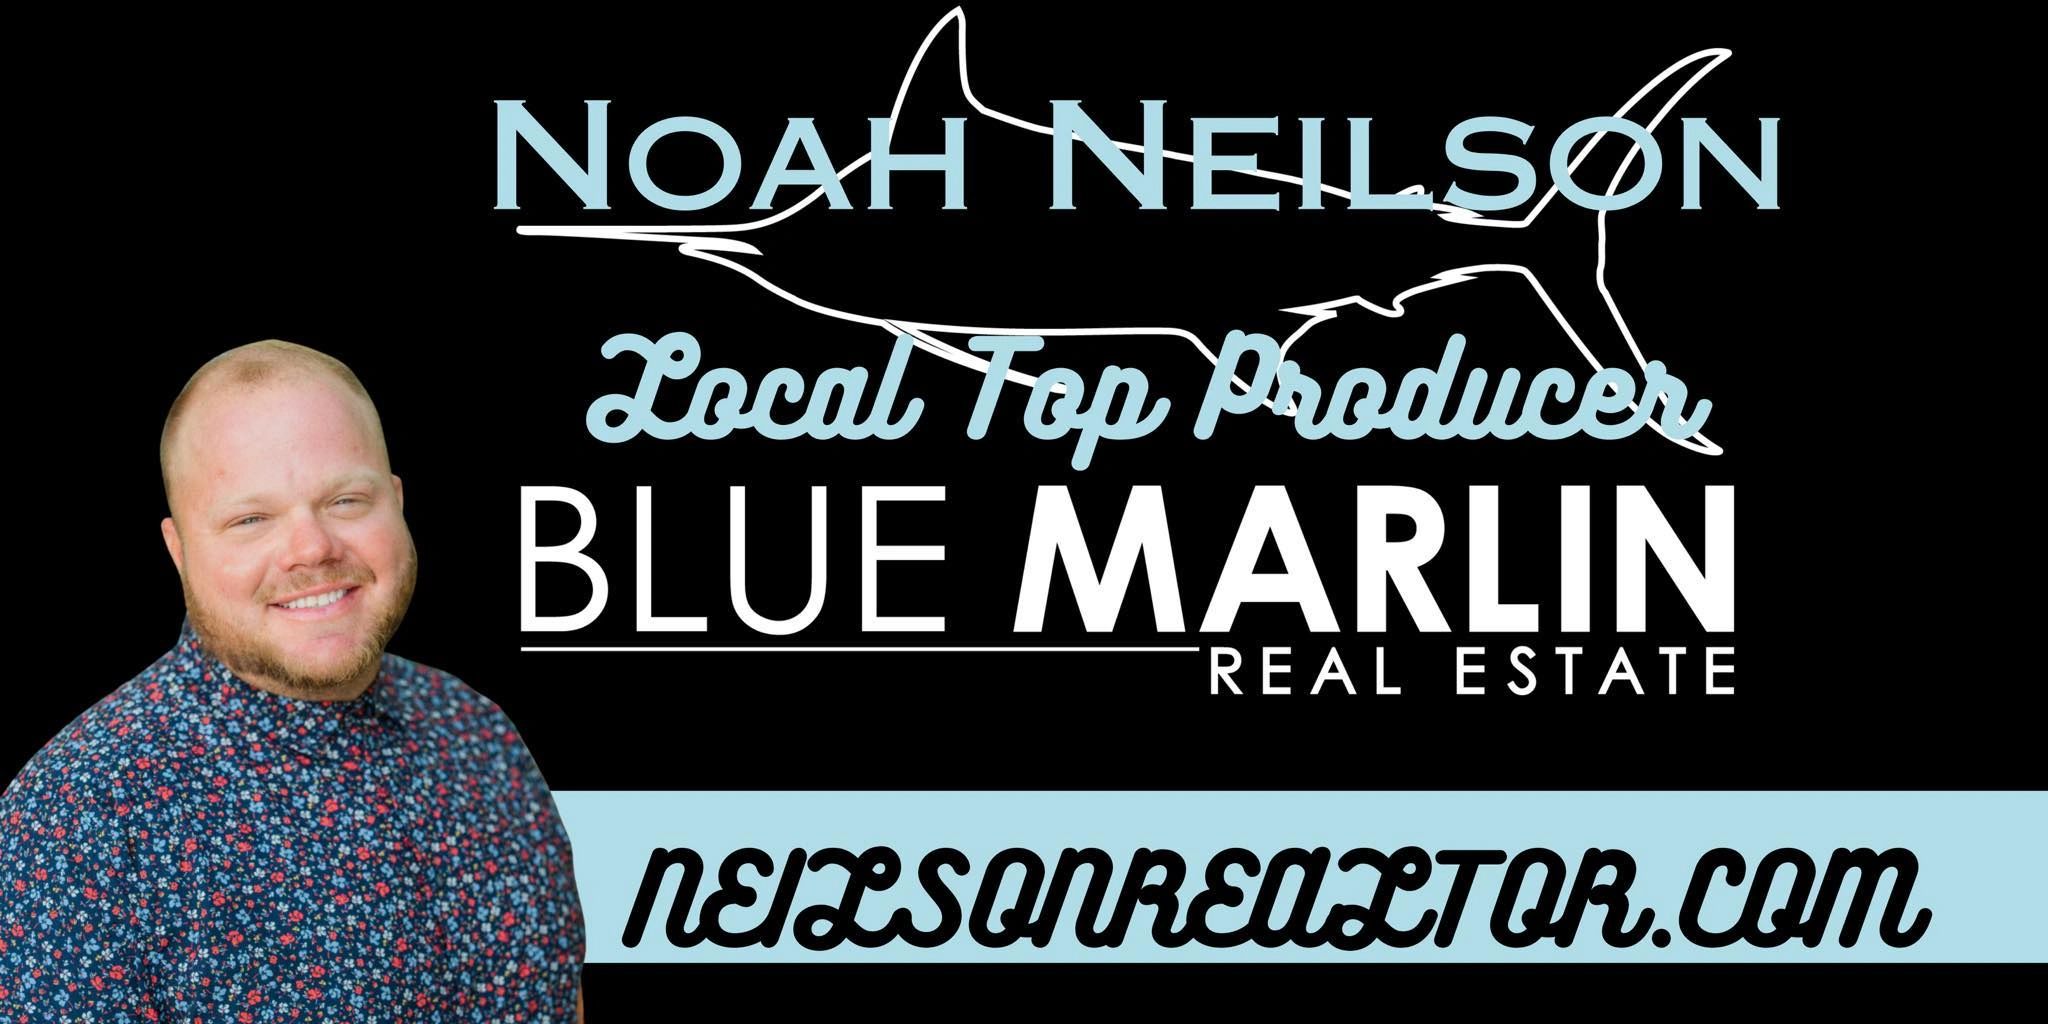 Buy New Perfect Dream Home Listings Sale & Property Real Estate Agent Cocoa Beach FL | Noah Neilson Realtor